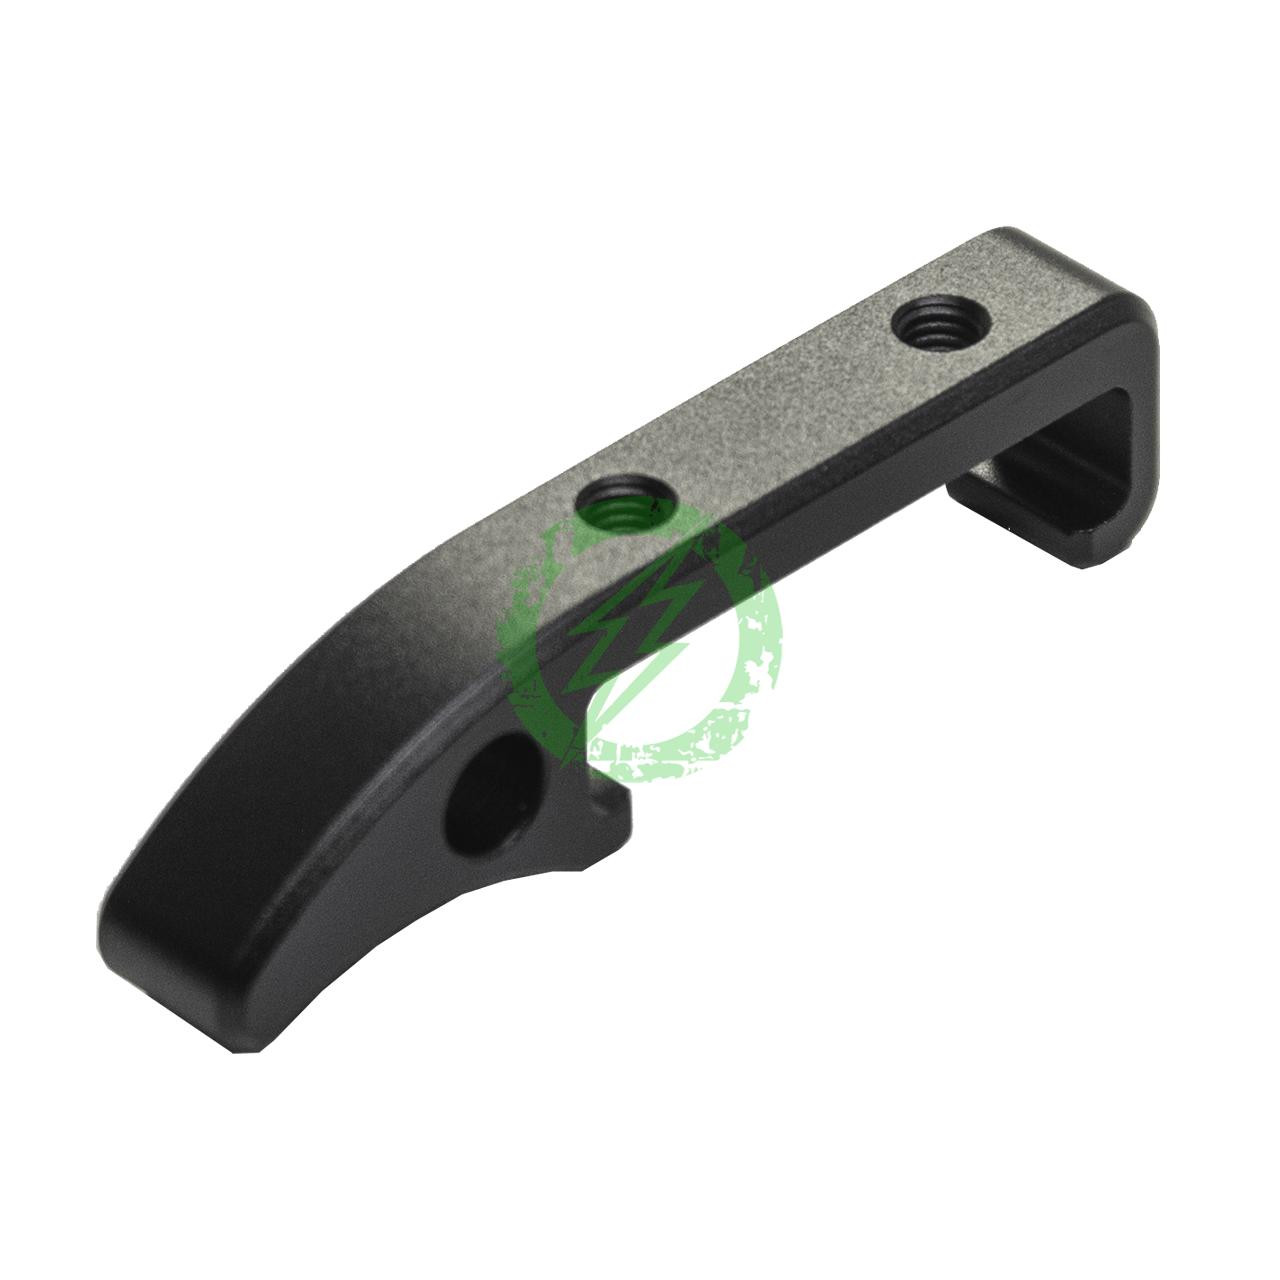  Action Army AAP-01 Charging Handle Type 1 